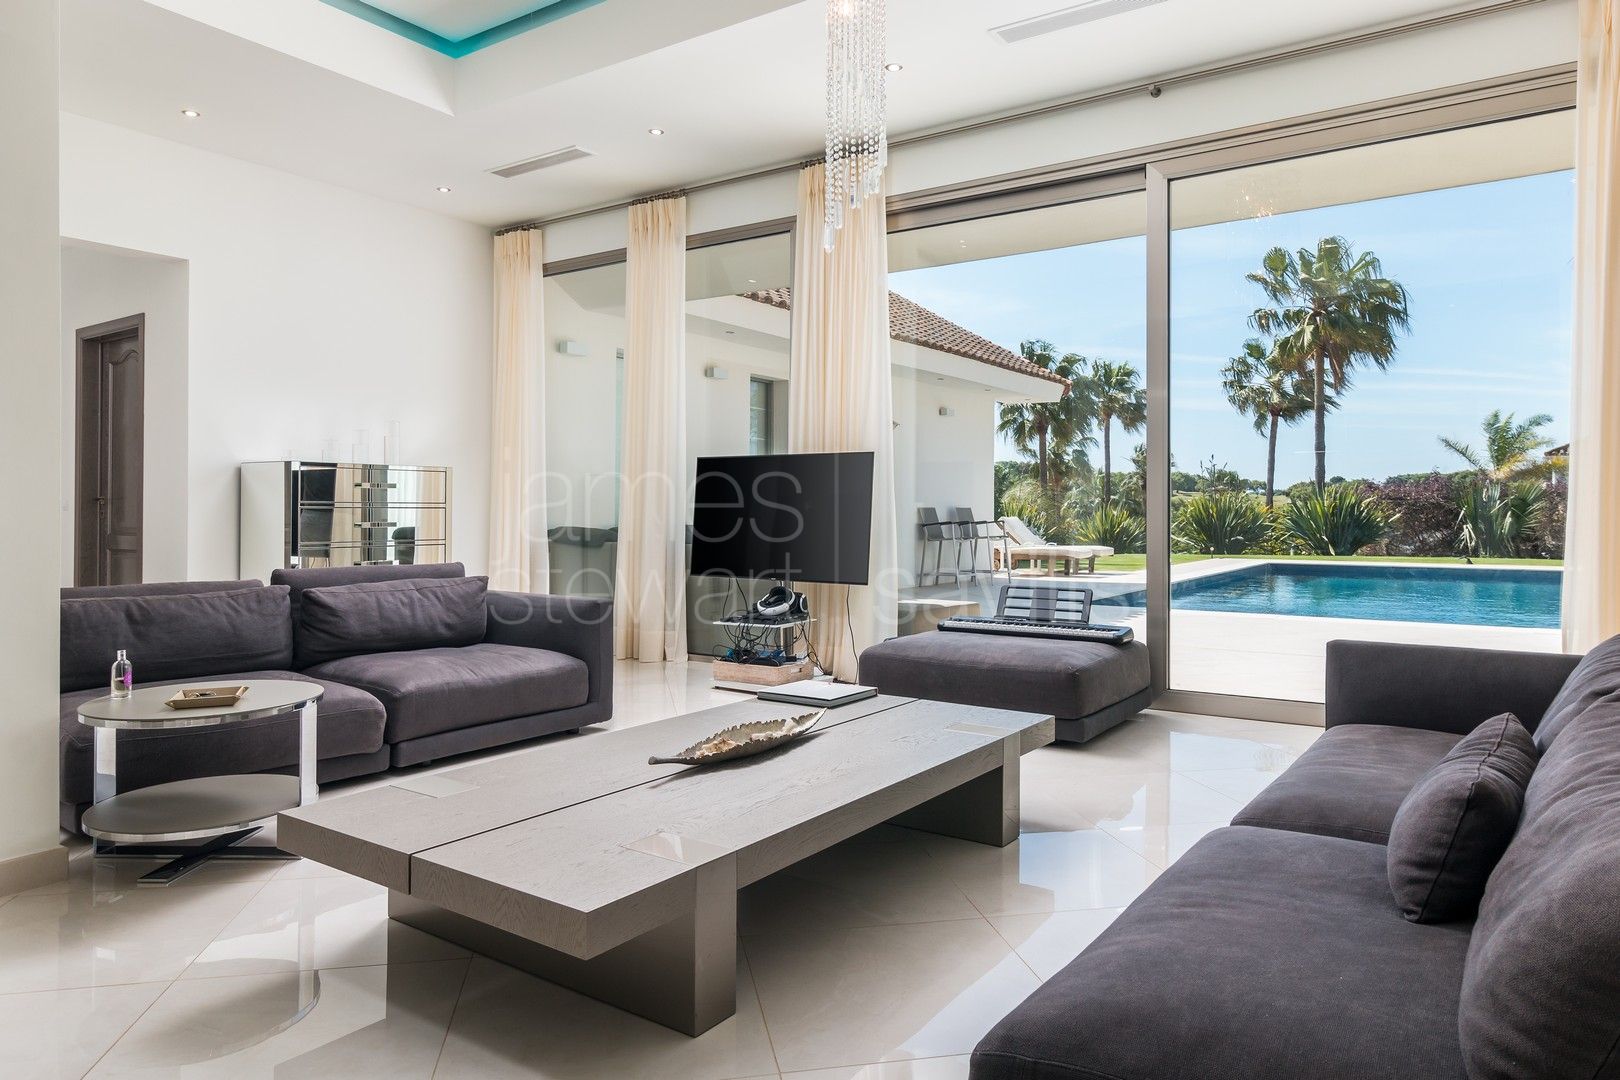 Exceptional home in the sotogrande Alto with 5 bedroom on an elevated plot